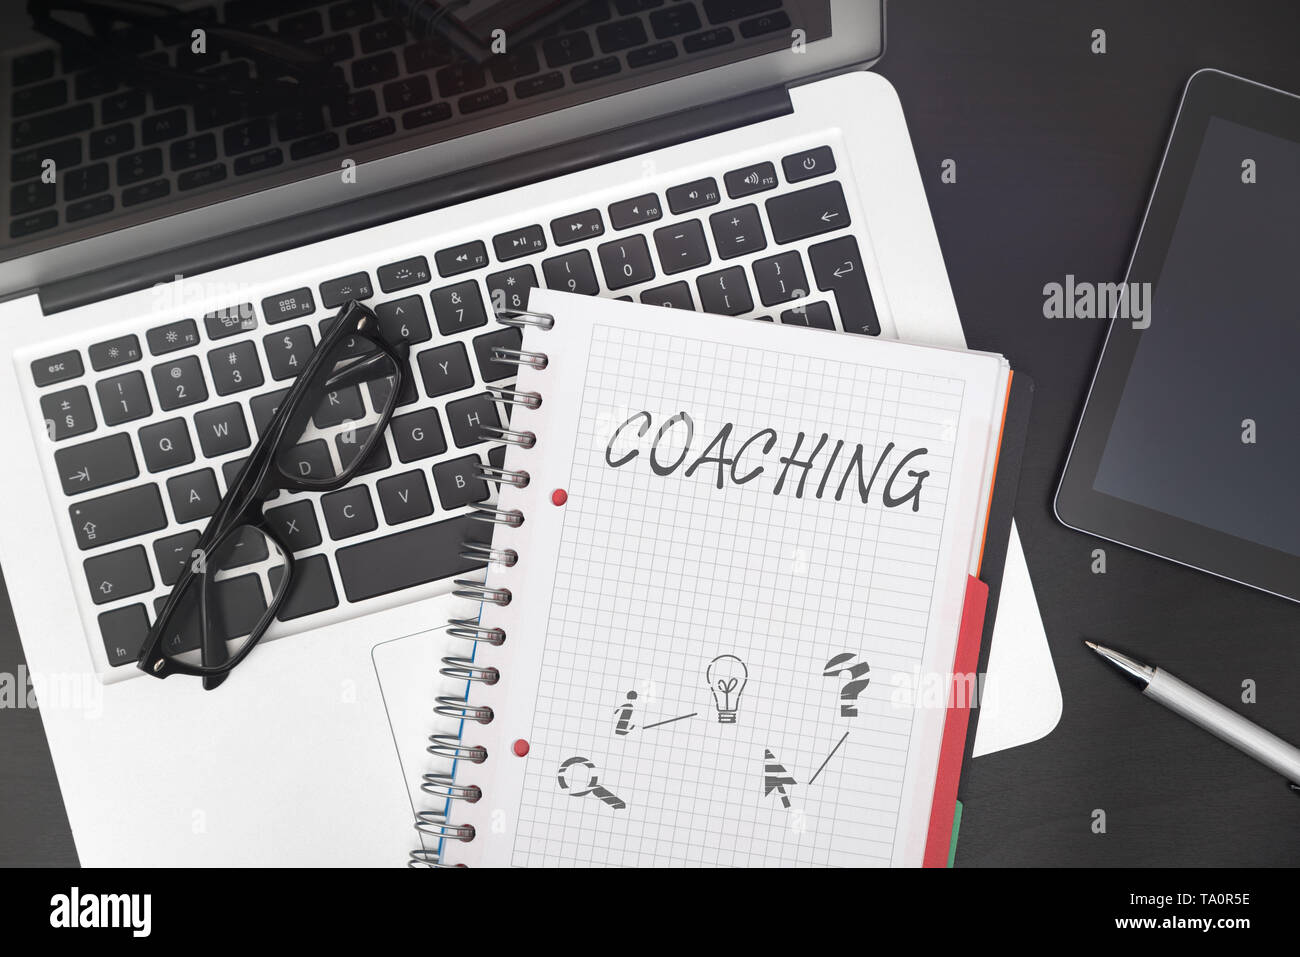 Coaching composition on desk. Business training concept at work Stock Photo